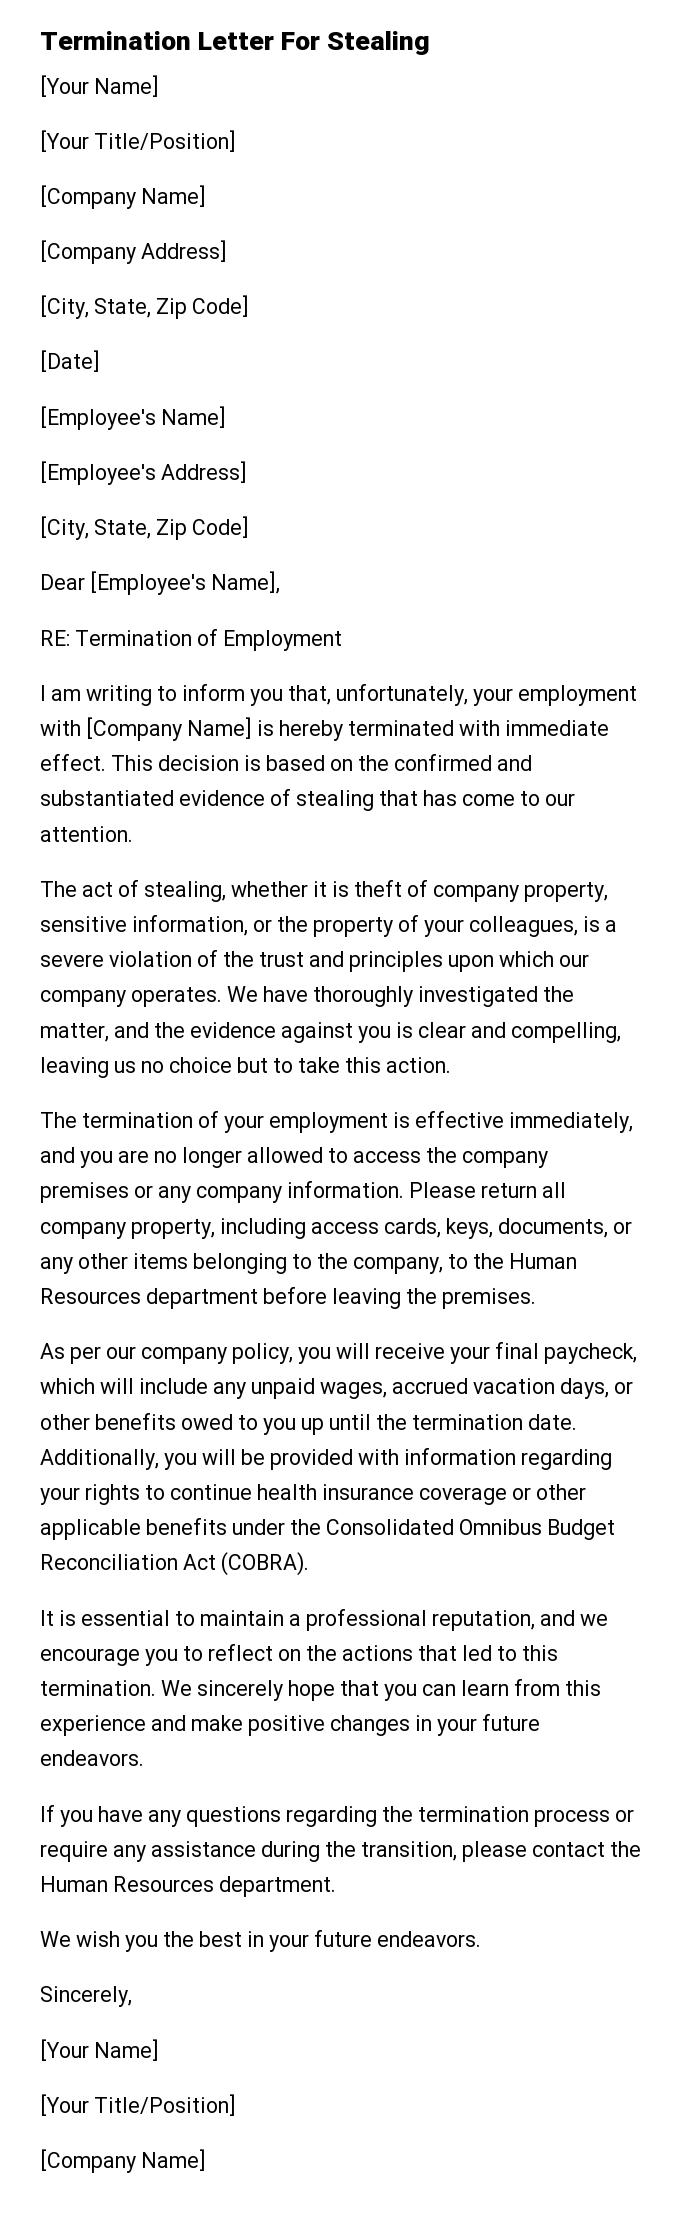 Termination Letter For Stealing